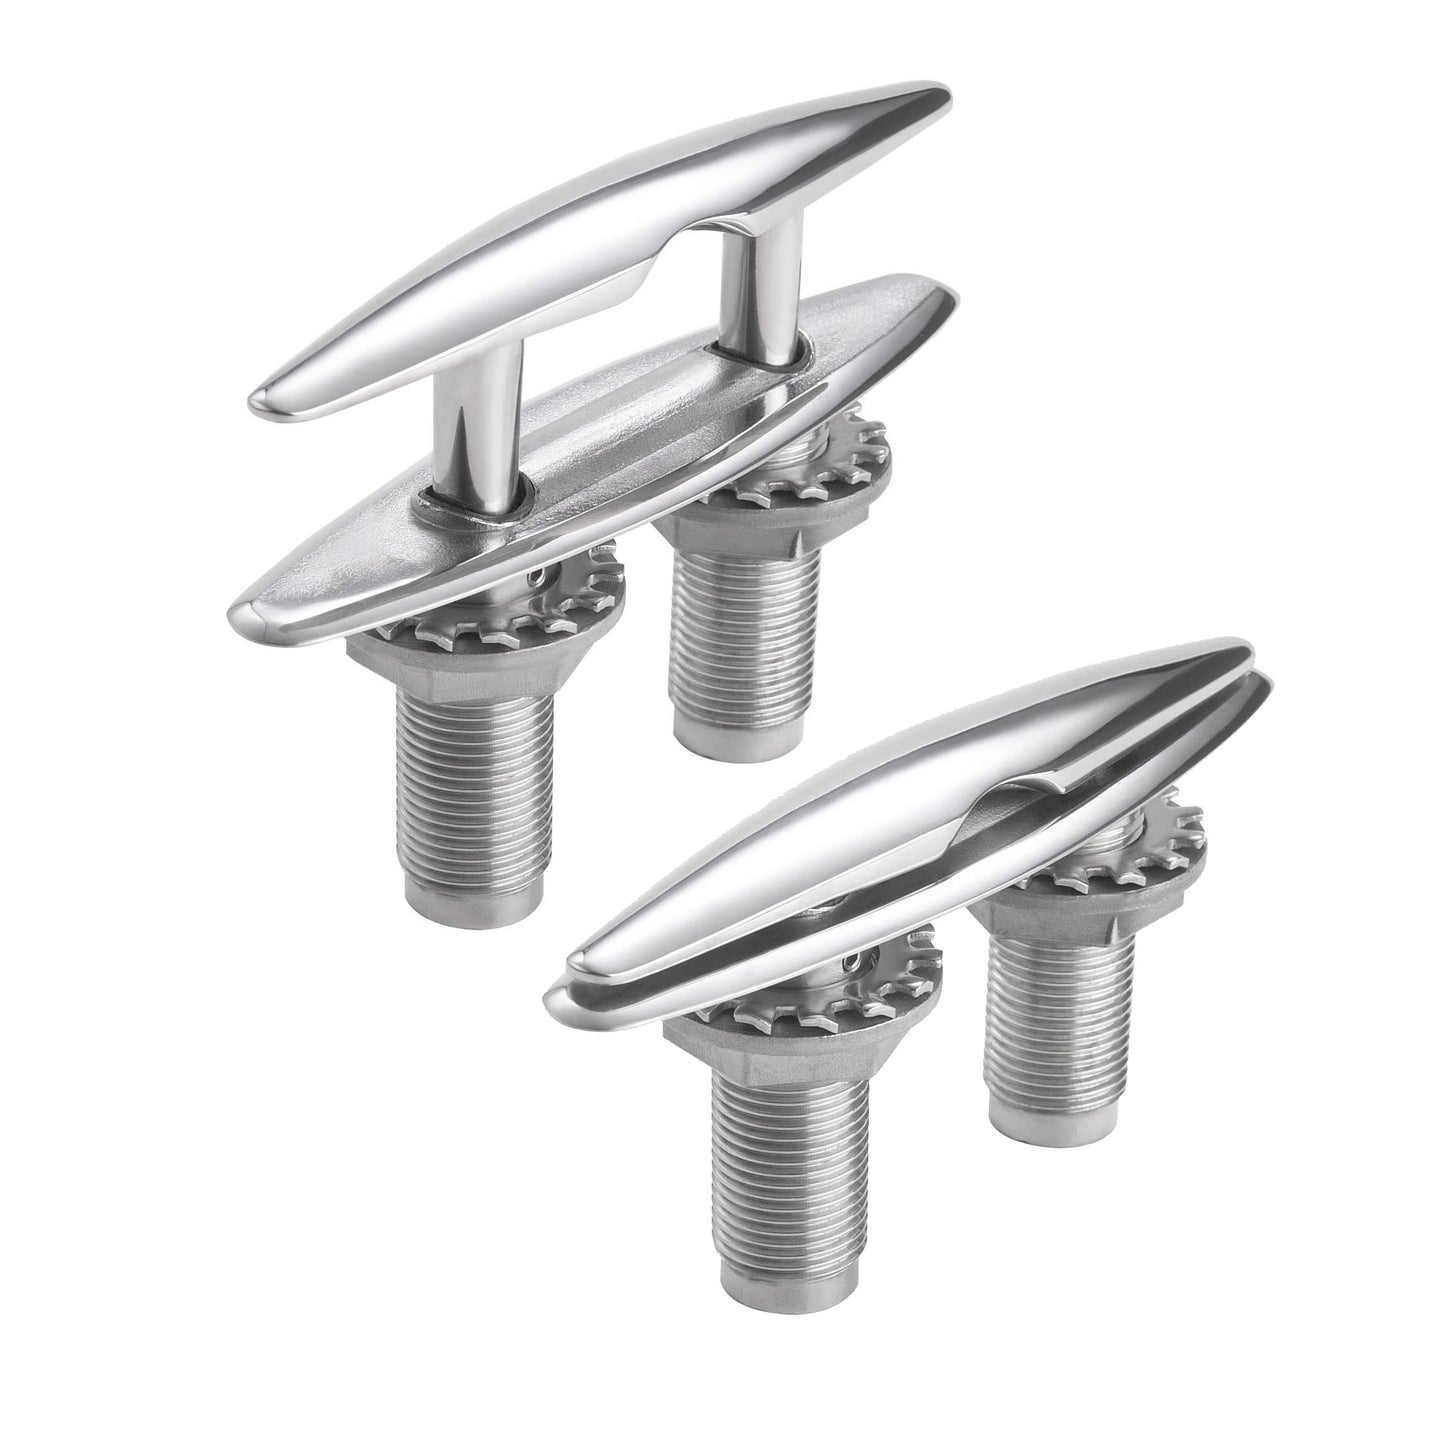 Polished stainless steel pull-up cleats